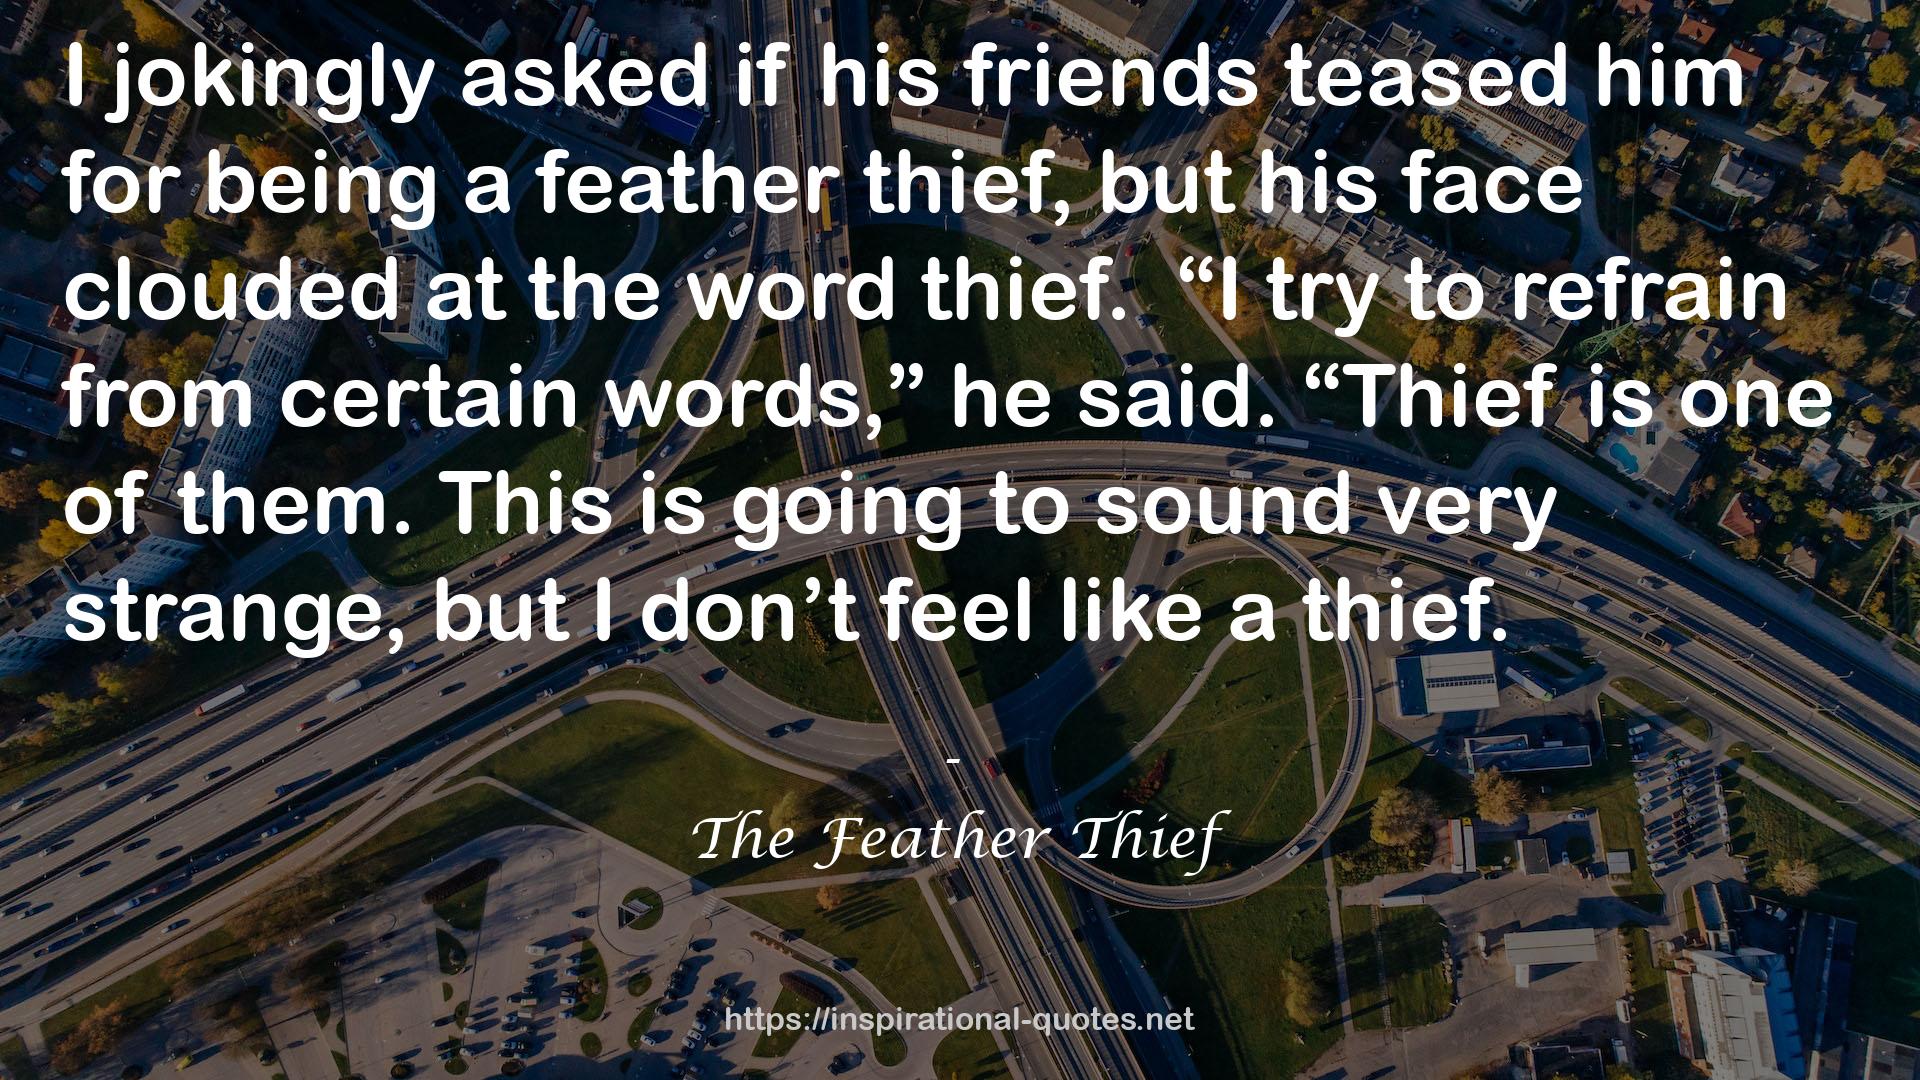 The Feather Thief QUOTES